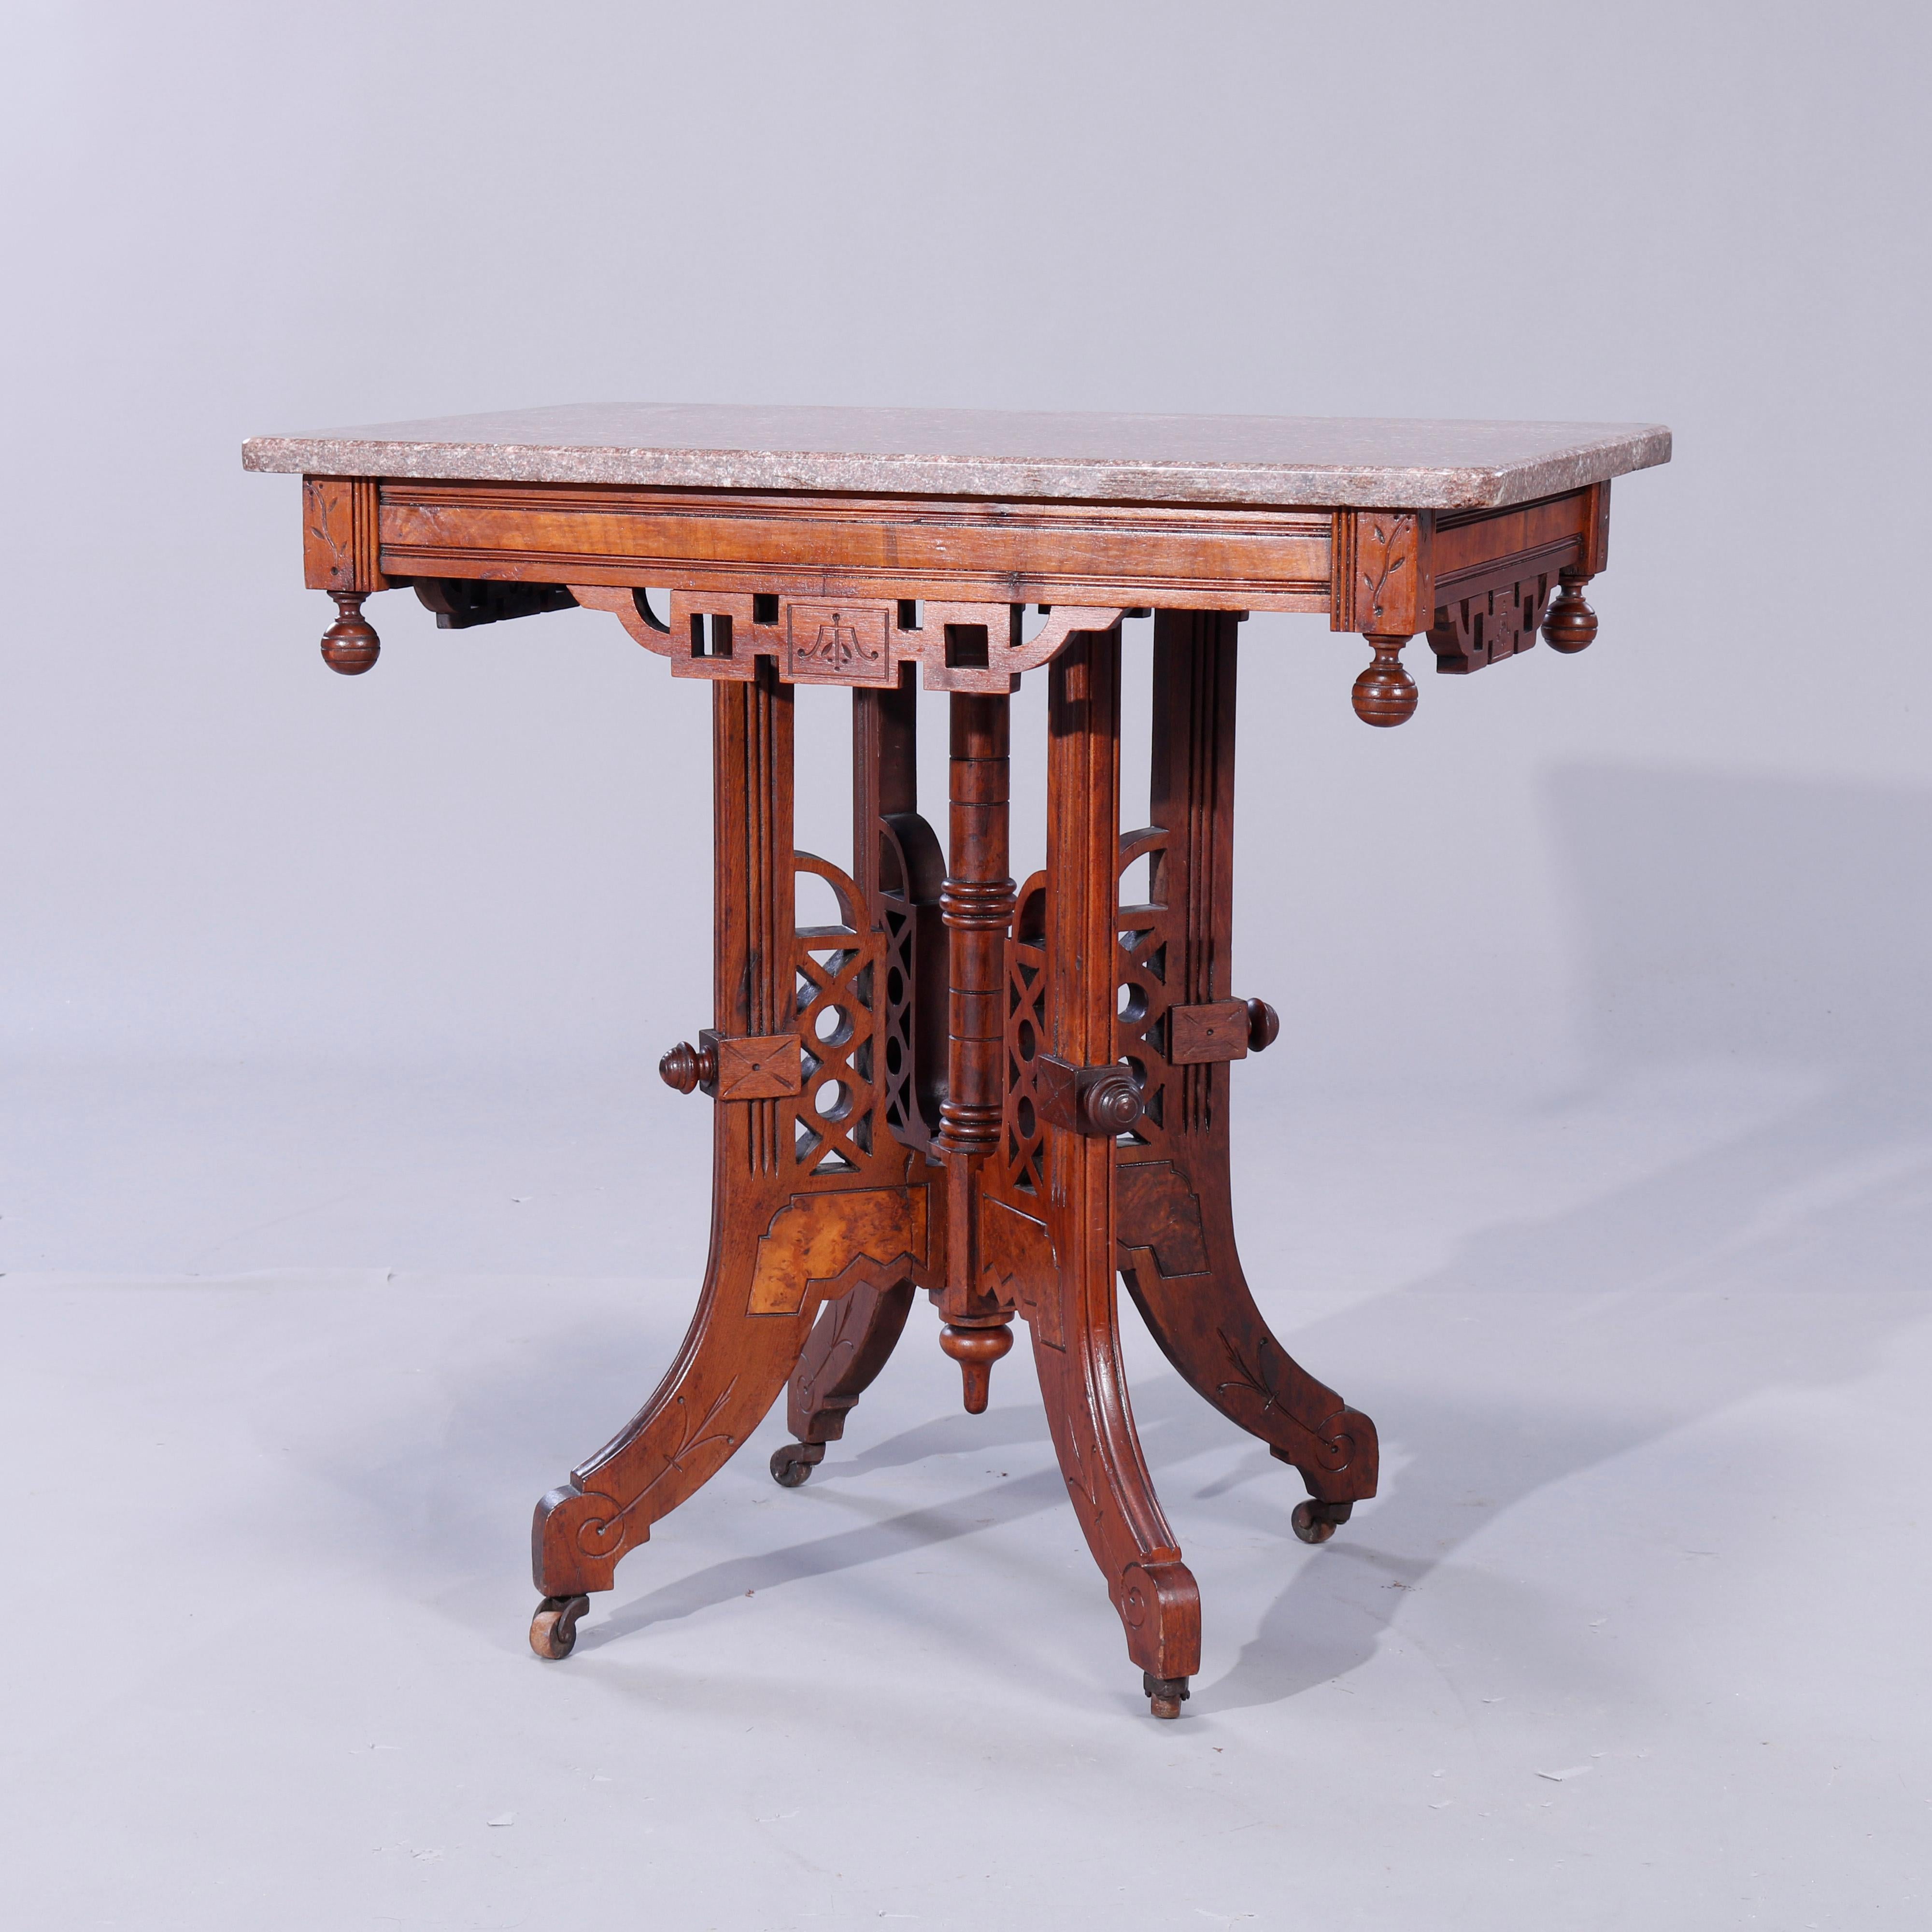 An antique Eastlake parlor table offers rouge marble top over carved walnut base having burl inset, cut-out skirl and drop ball finials raised on legs with cutout design and turned central column, elements reminiscent of Art Deco, c1890

Measures -